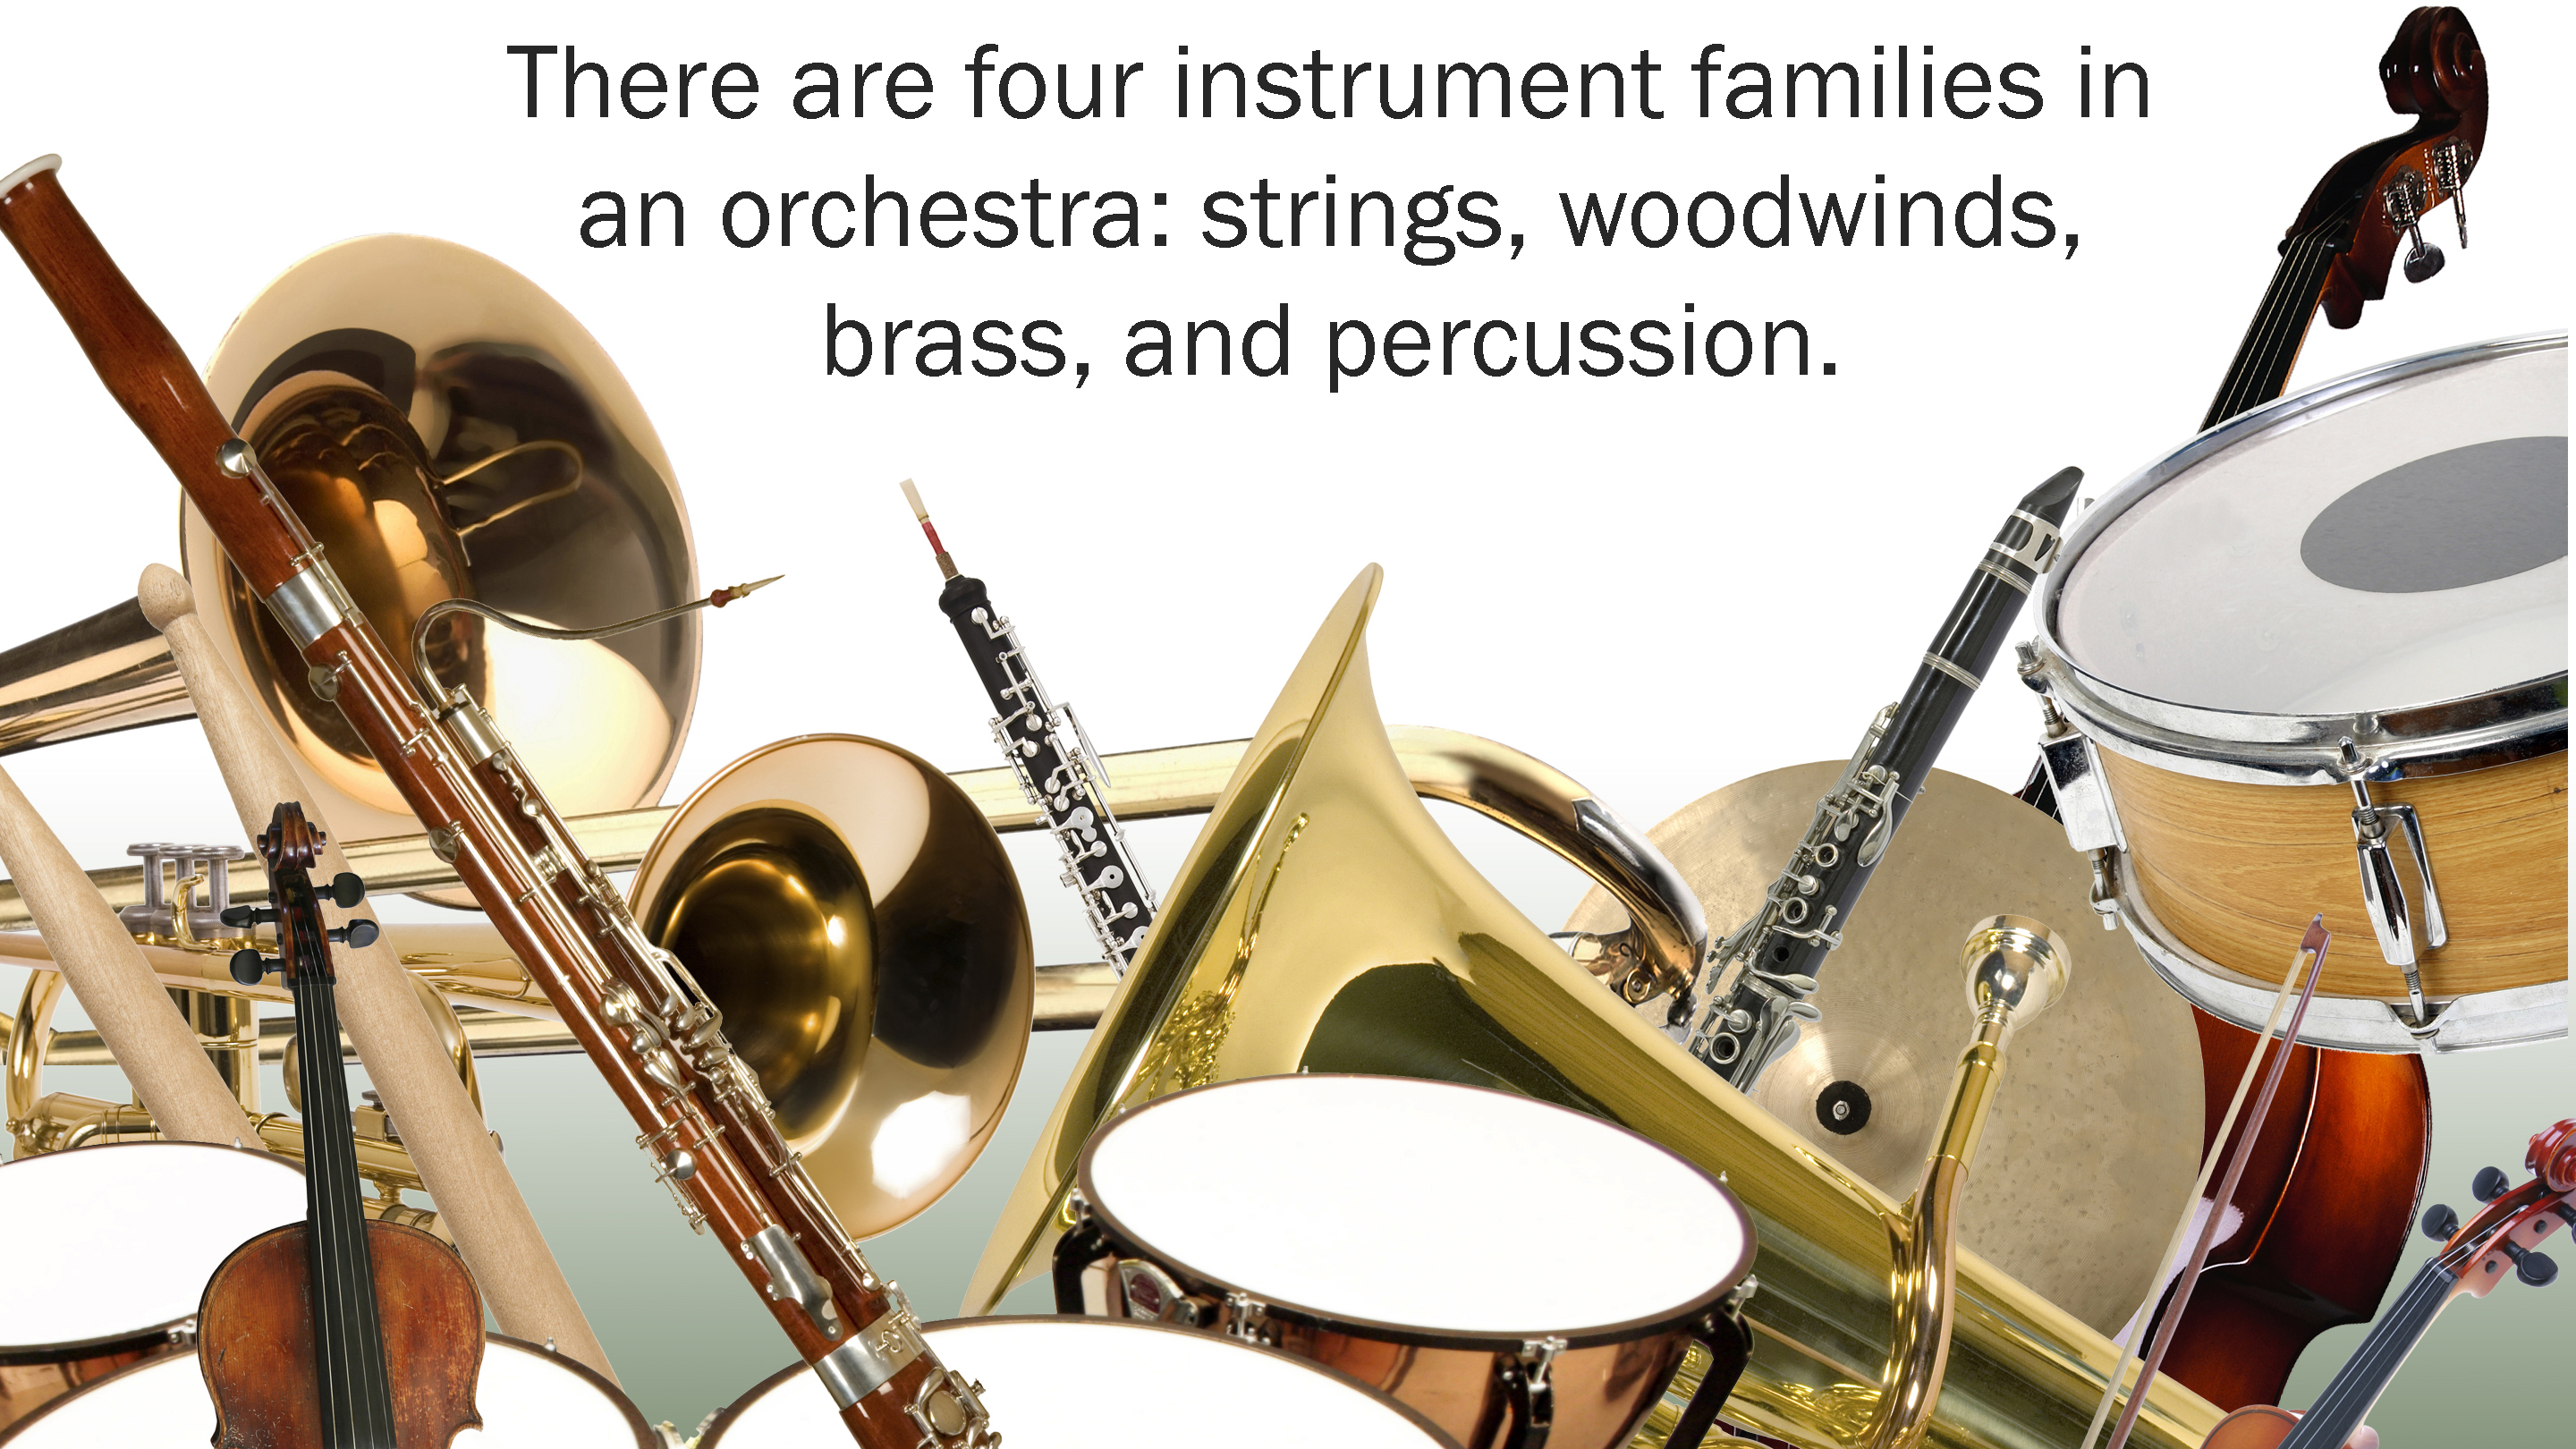 The Drum: List of Musical Instruments in the Drum Family